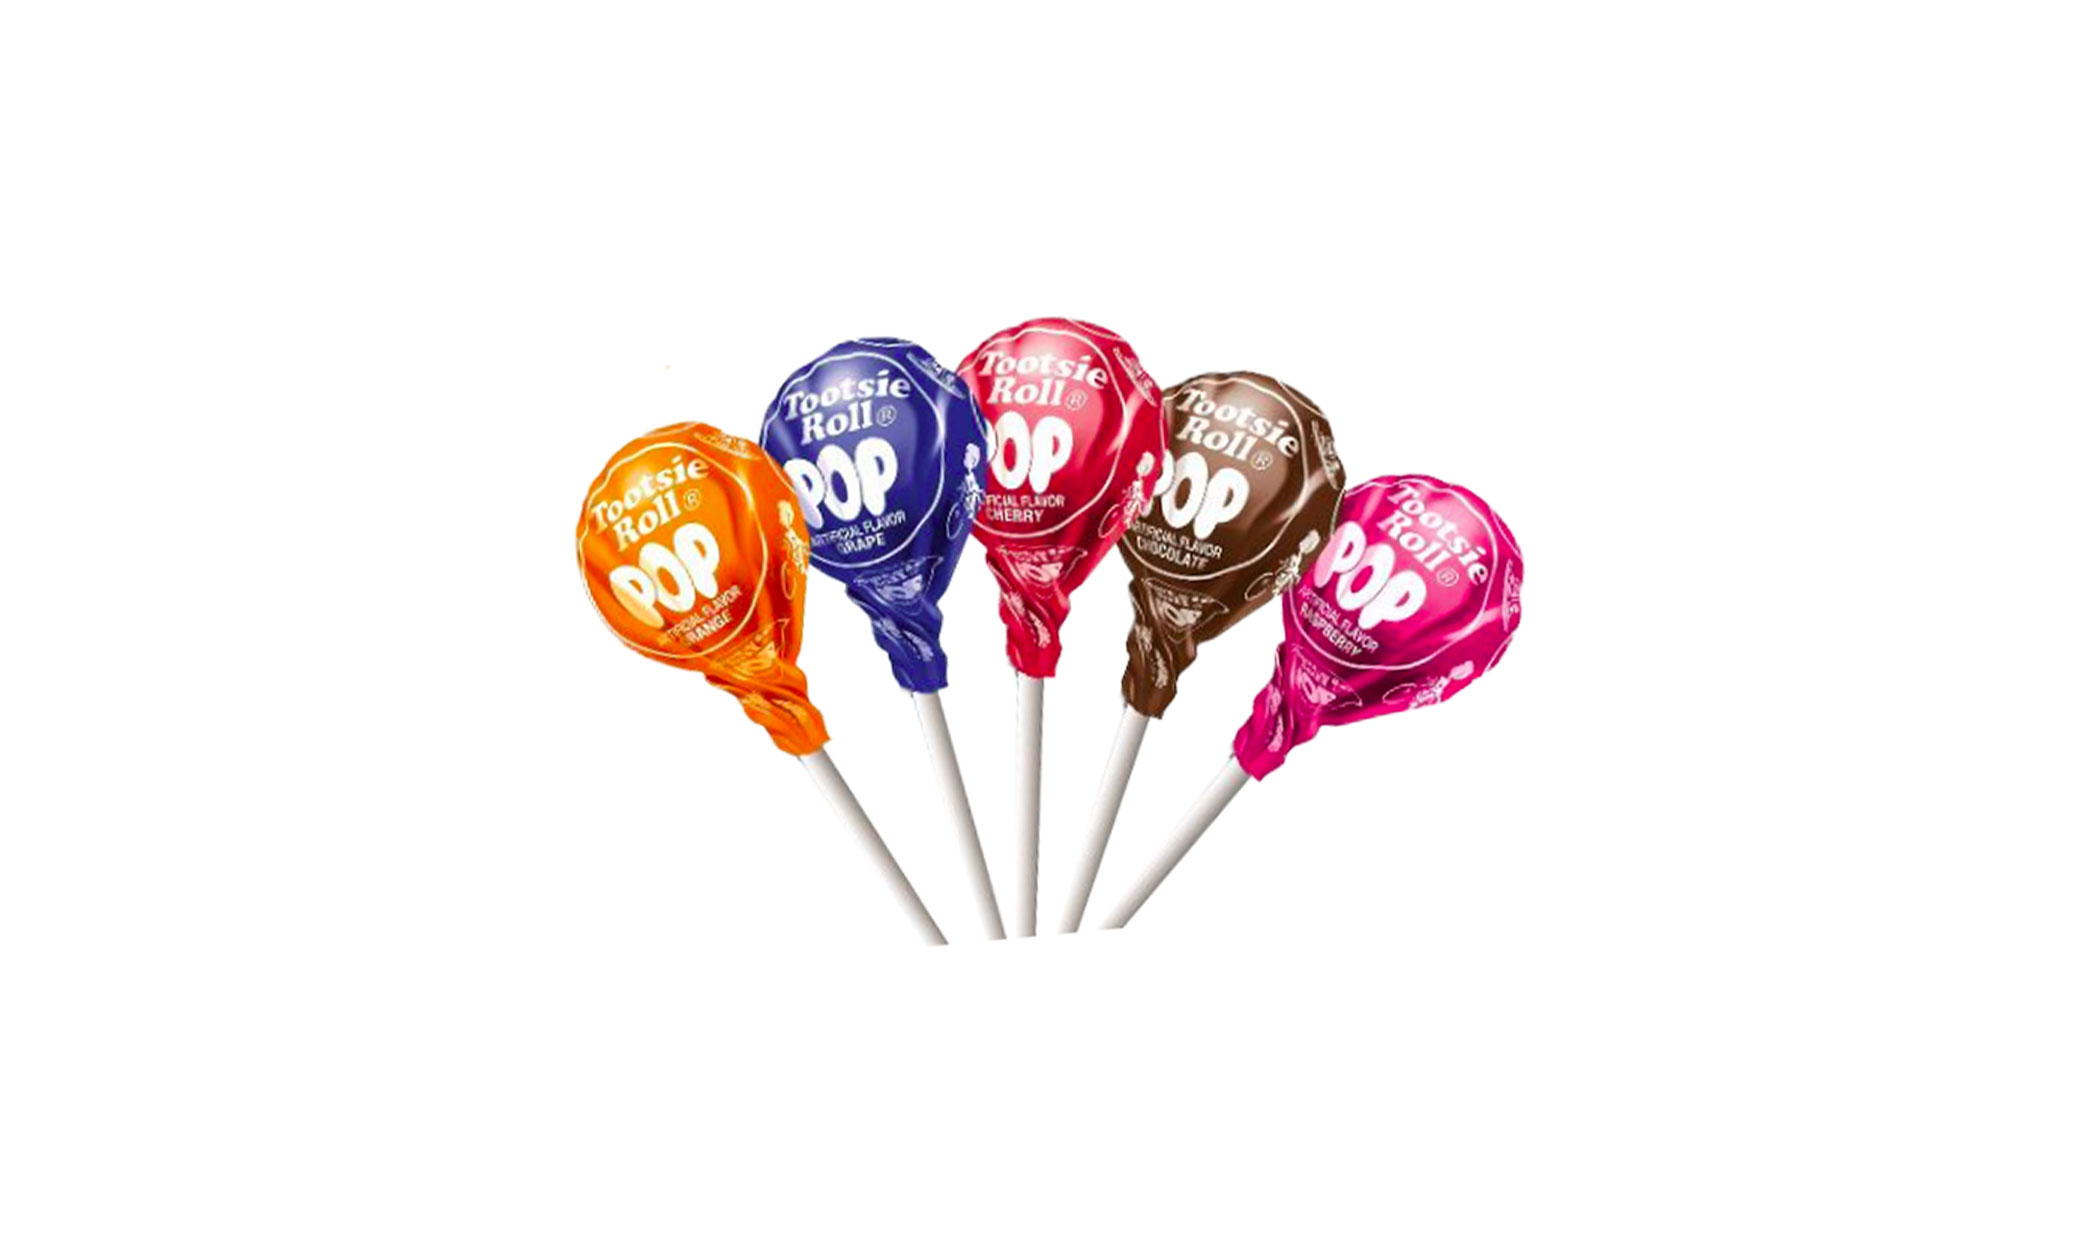 Claim Your FREE Tootsie Roll Pops! – The Savvy Sampler